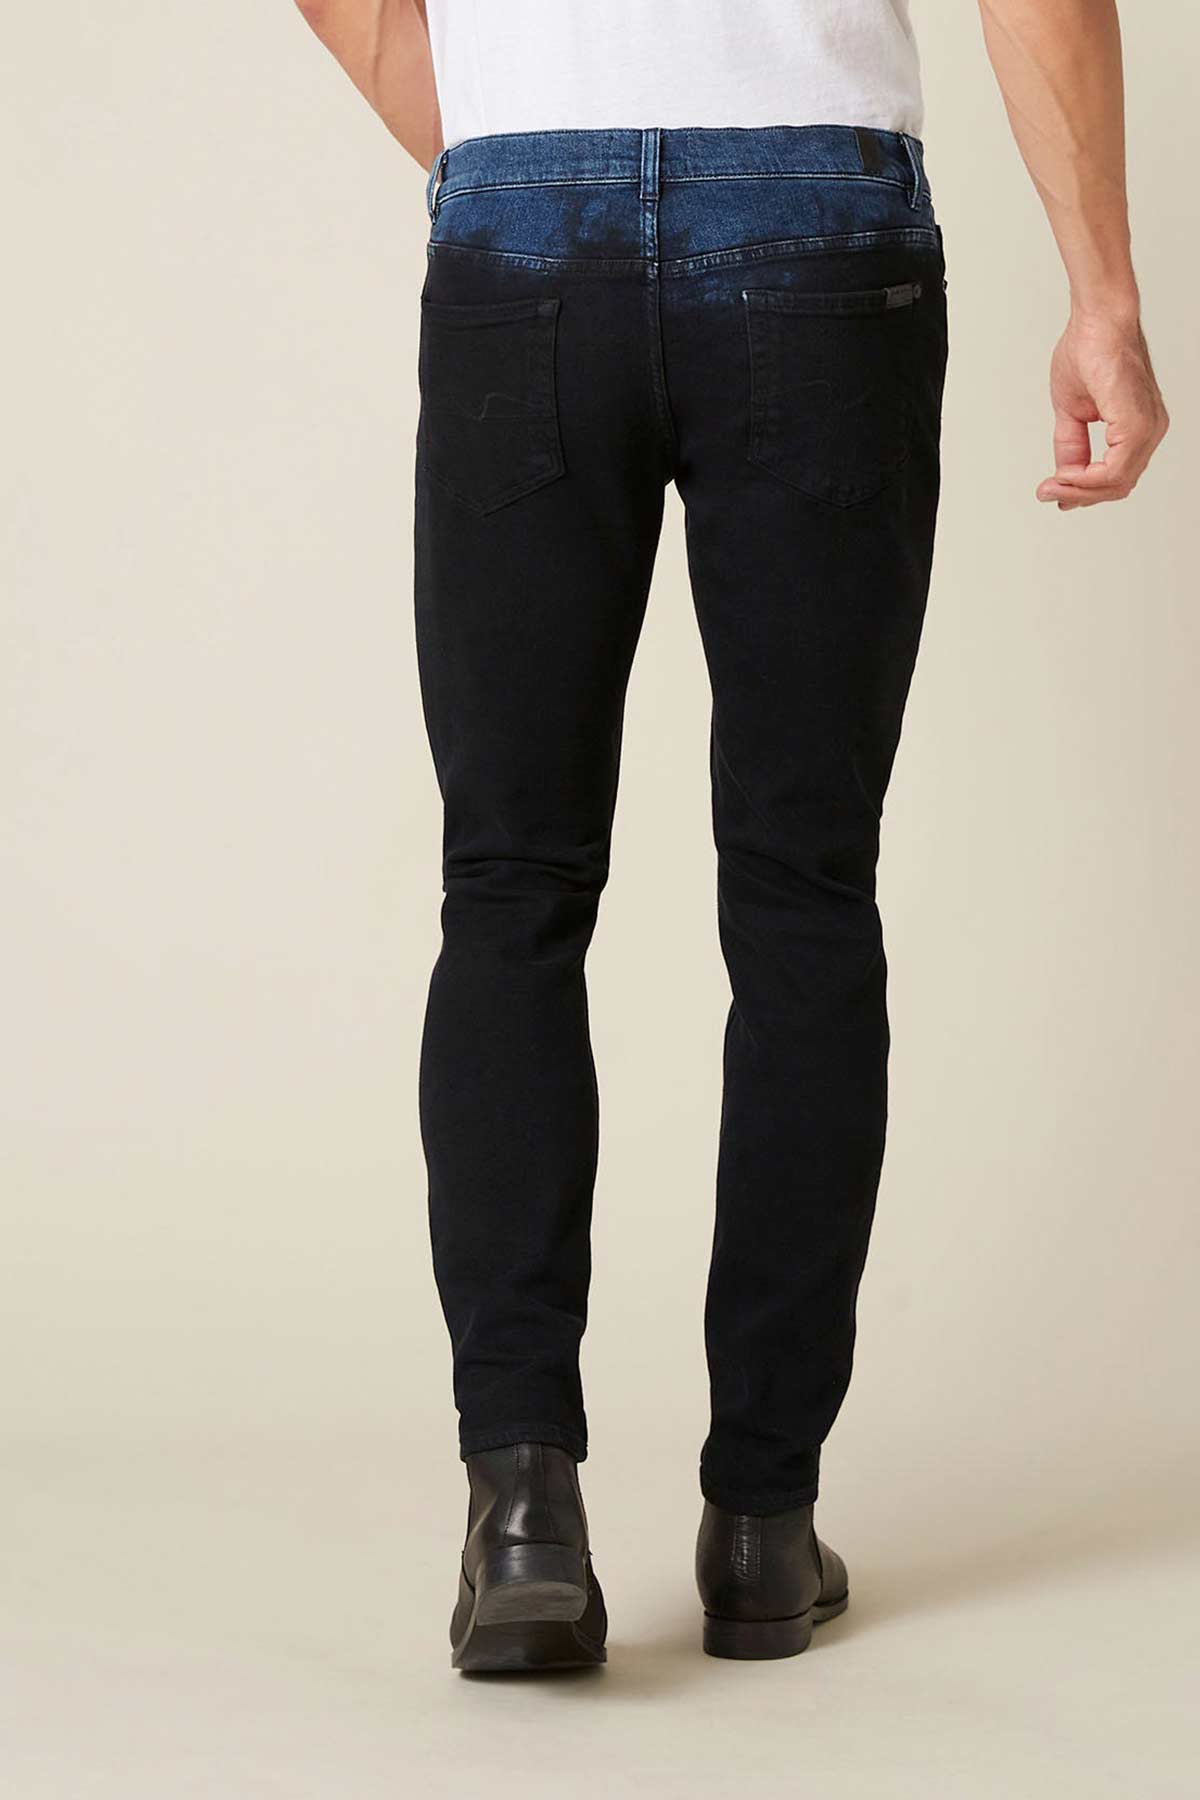 7 For All Mankind Ronnie Tapered Jeans-Libas Trendy Fashion Store